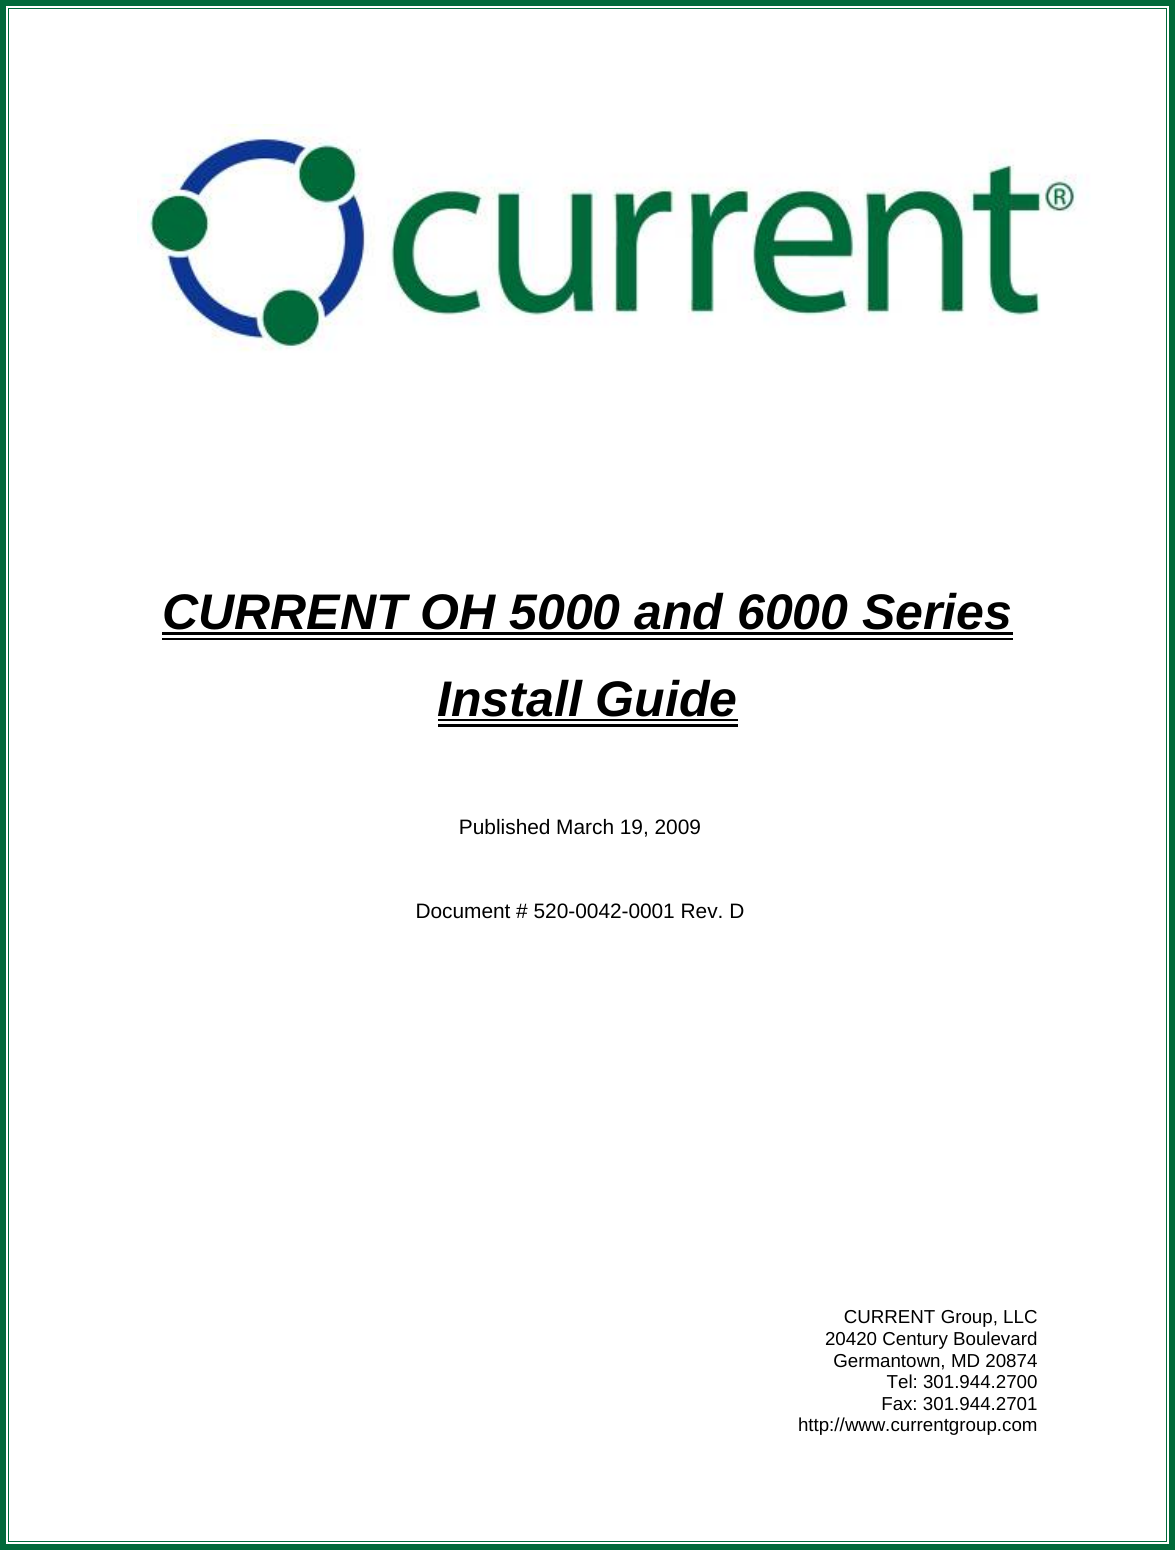             CURRENT OH 5000 and 6000 Series Install Guide    Published March 19, 2009    Document # 520-0042-0001 Rev. D                 CURRENT Group, LLC 20420 Century Boulevard Germantown, MD 20874 Tel: 301.944.2700 Fax: 301.944.2701 http://www.currentgroup.com 